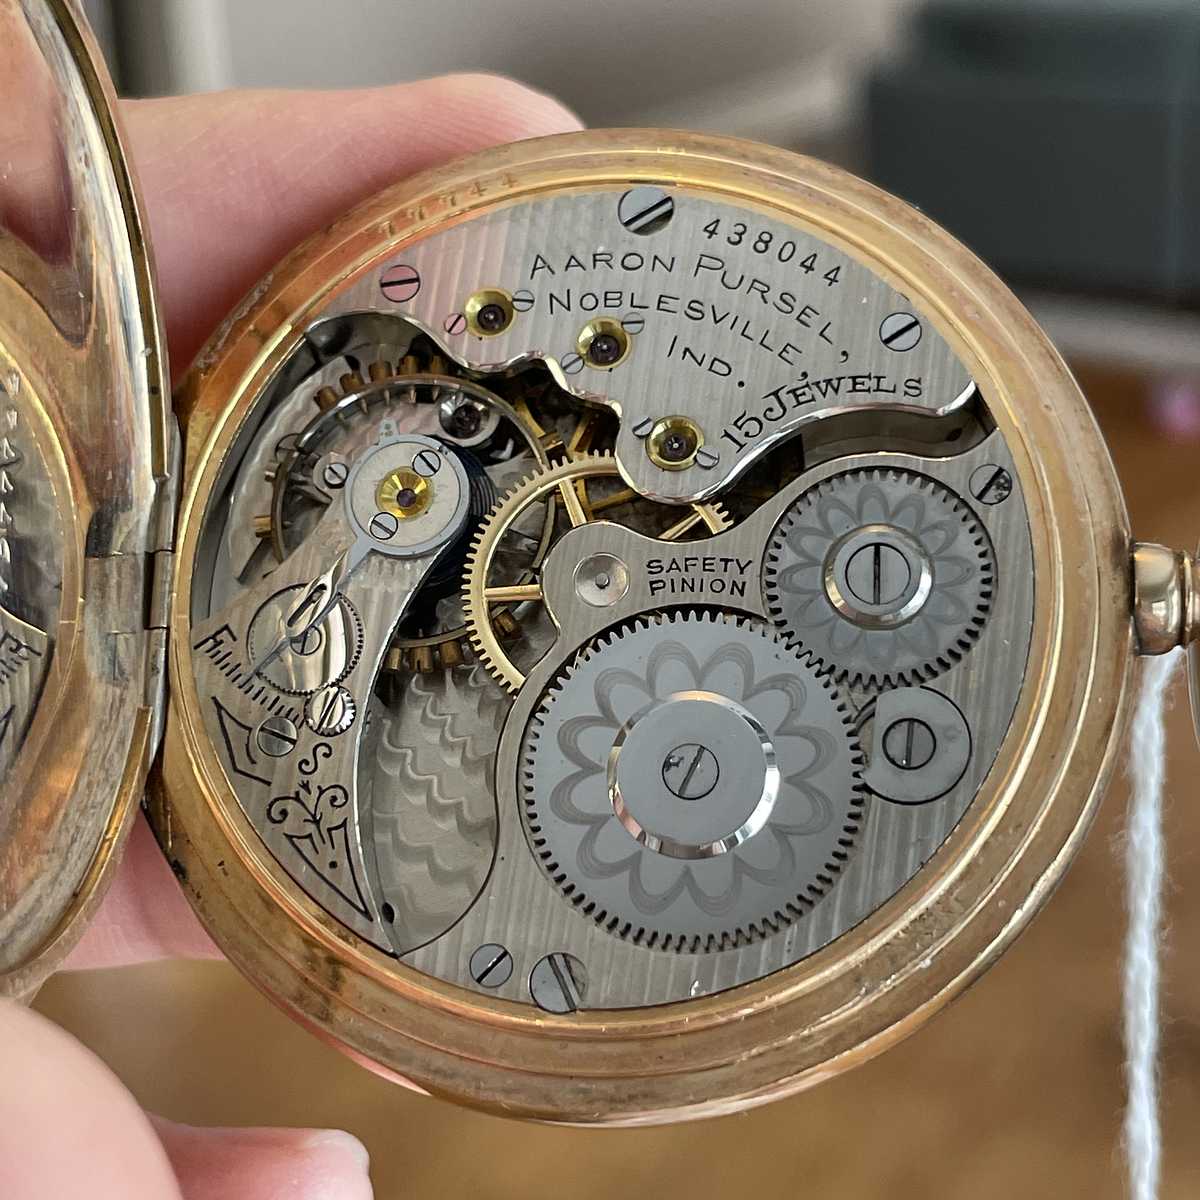 1906 South Bend Watch Grade 280 Aaron Pursel - Noblesville, Indiana - South Bend Watch Company Movement